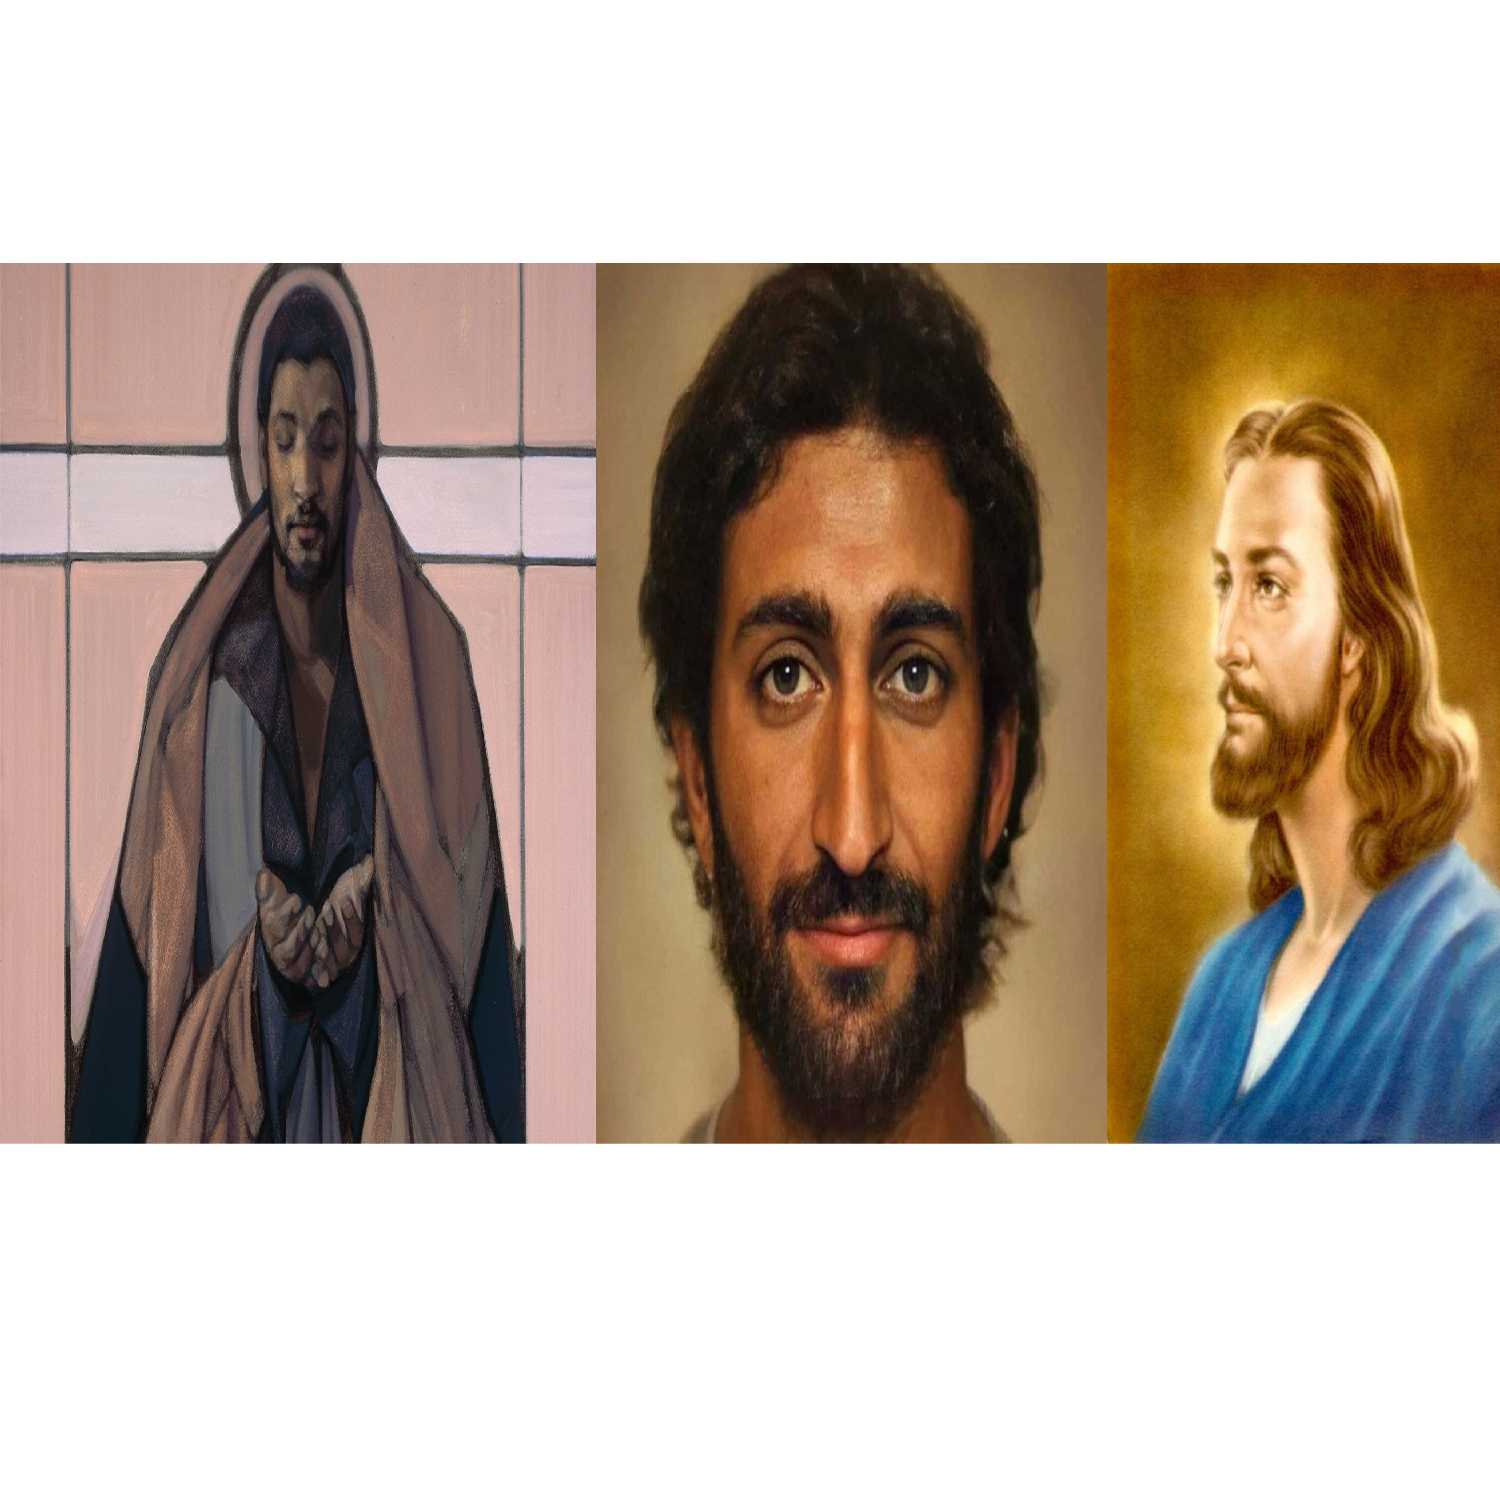 You Don't Really Know what Jesus Looked Like